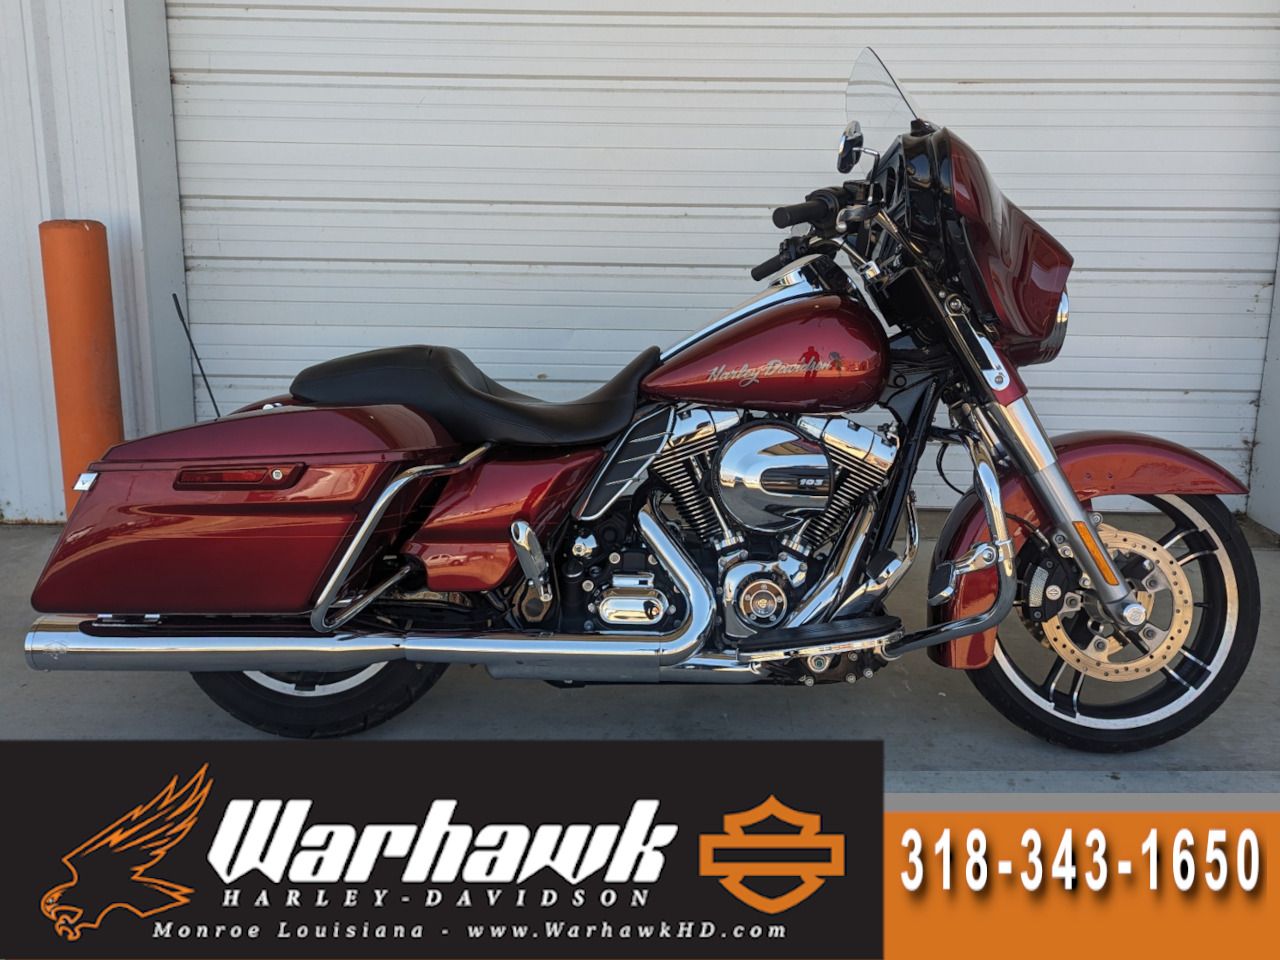 2016 harley davidson street glide special for sale near me - Photo 1